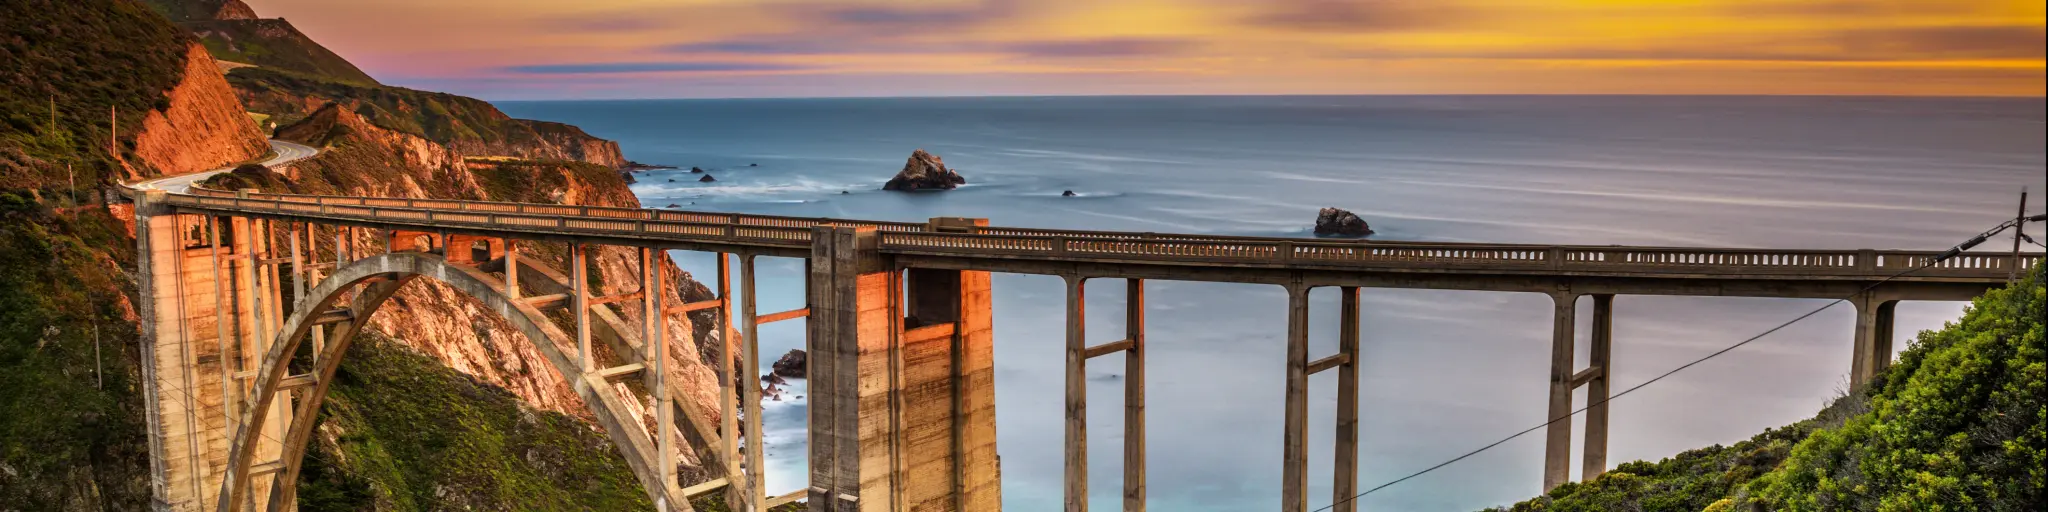 Bixby Creek Bridge is one of the highlights of Highway 1 that runs through the Big Sur in California.